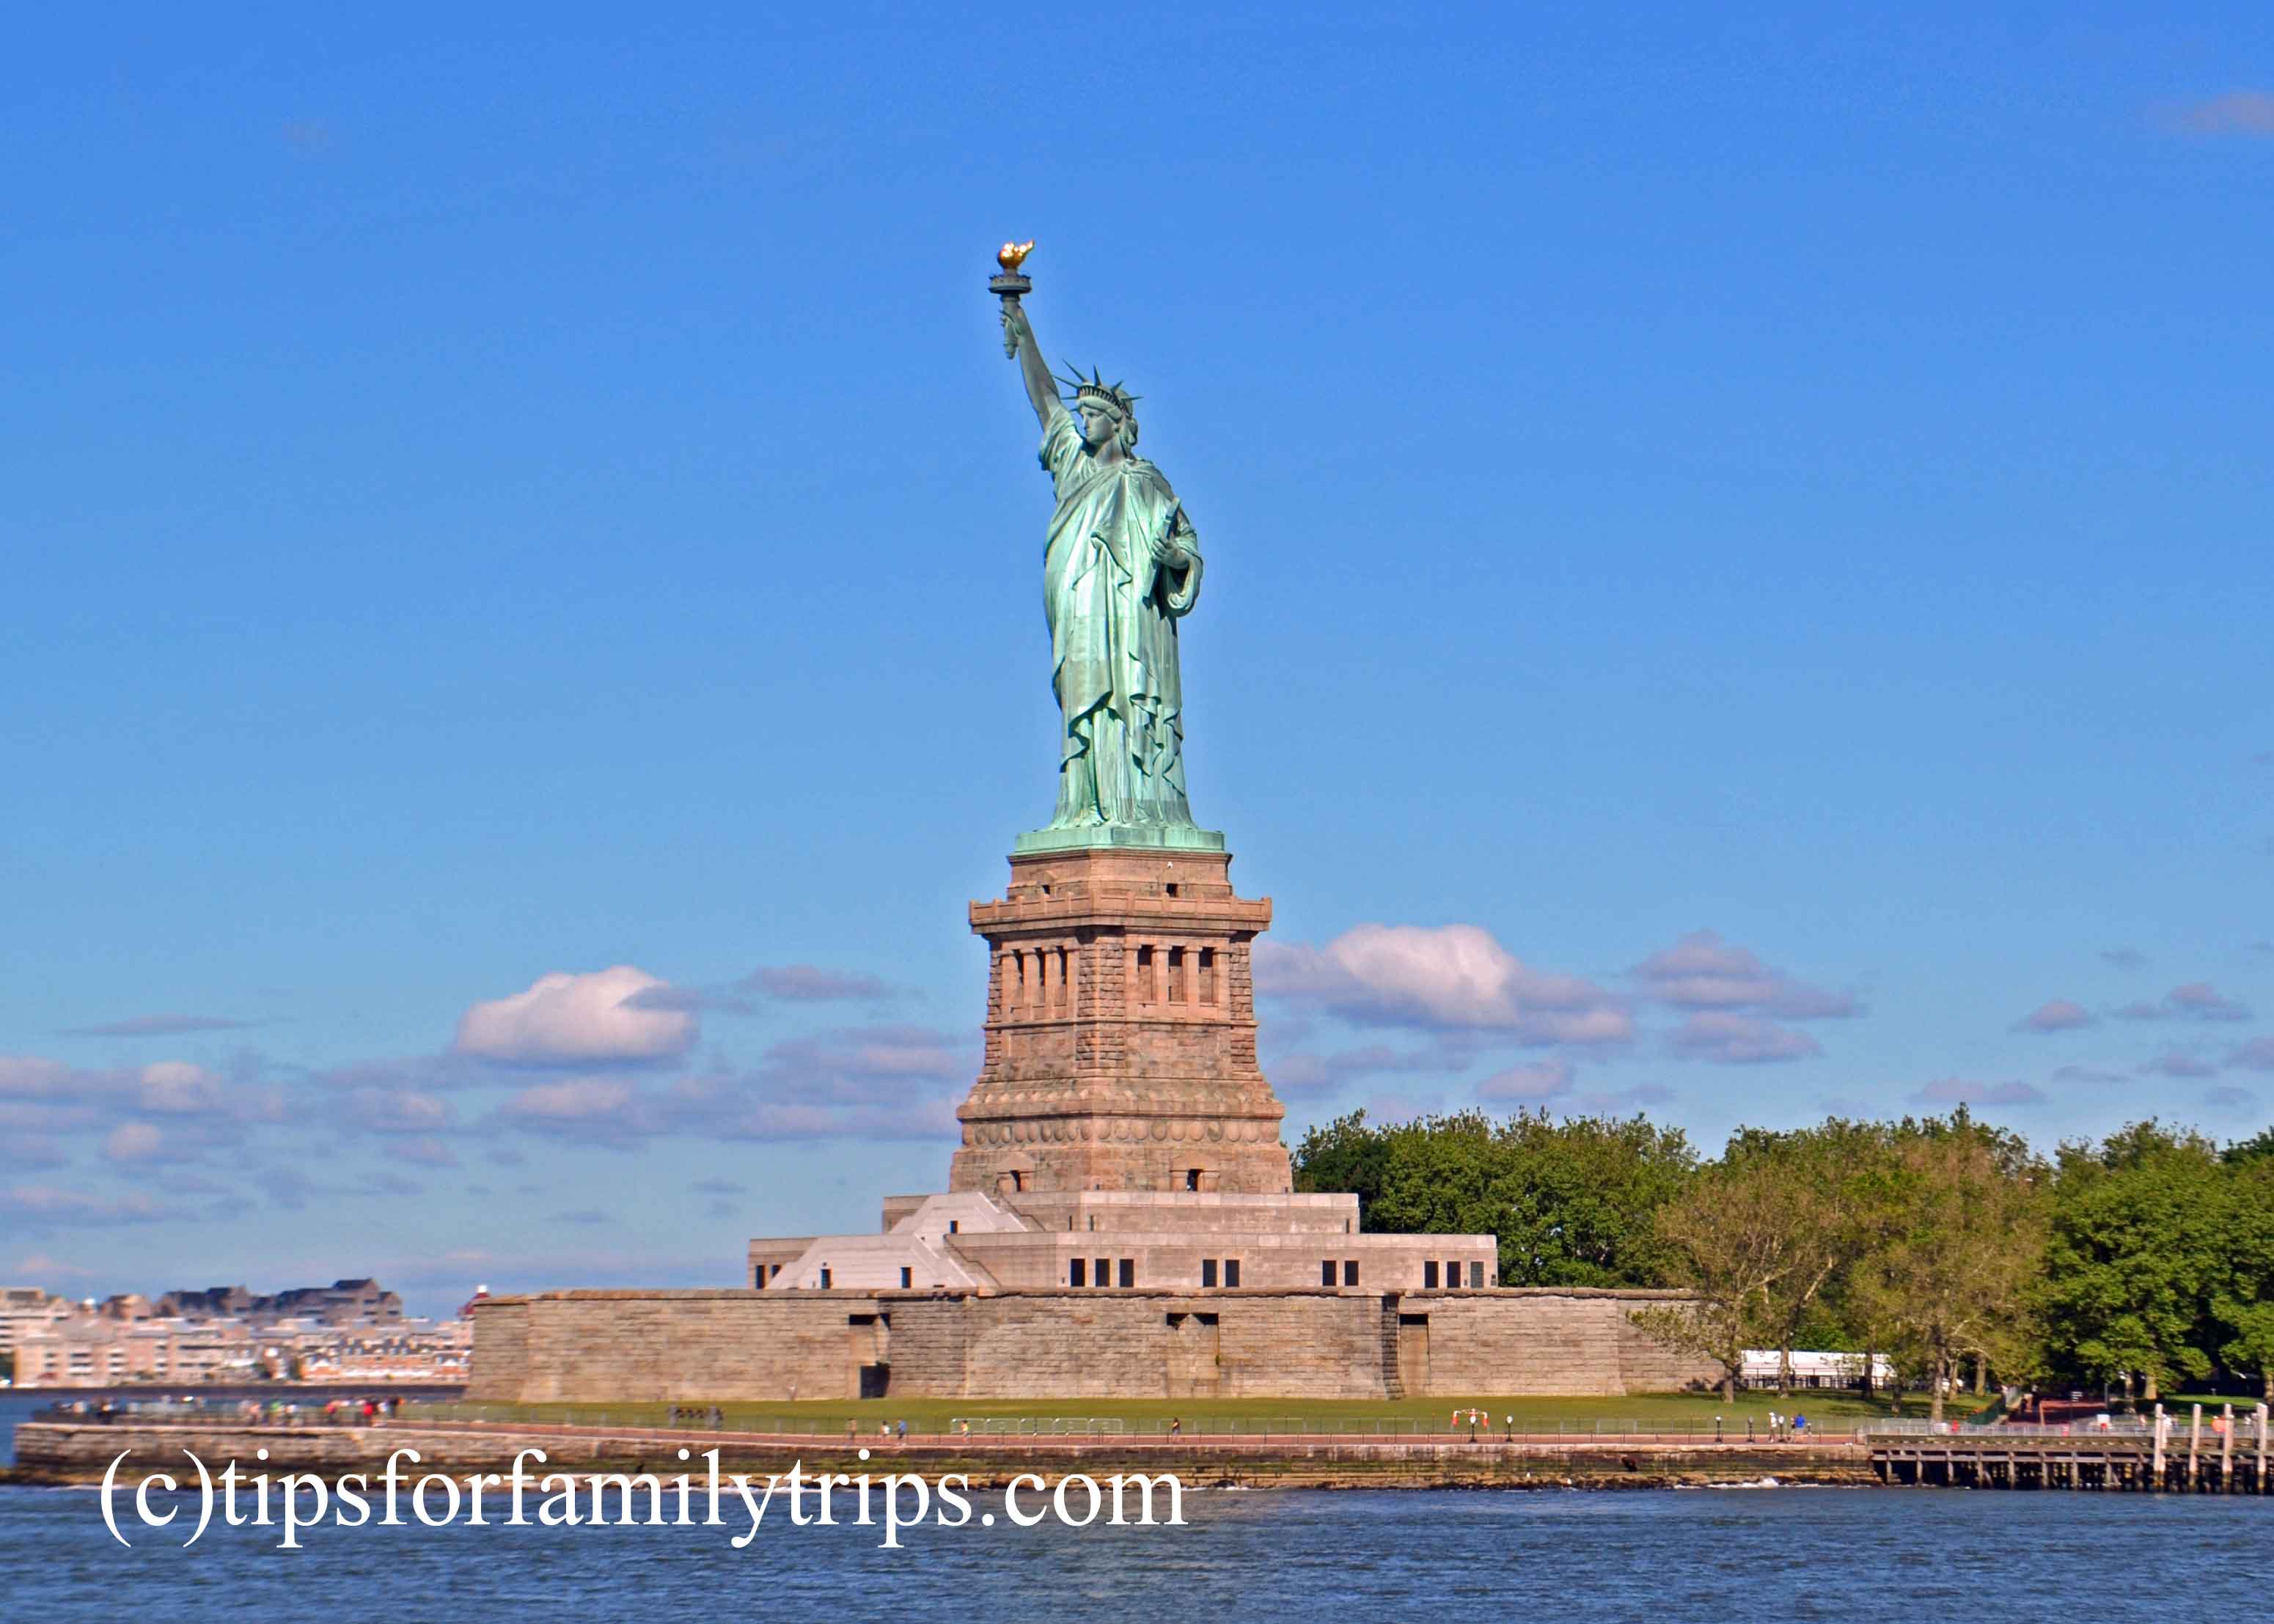 6 smart tips for visiting the Statue of Liberty with kids